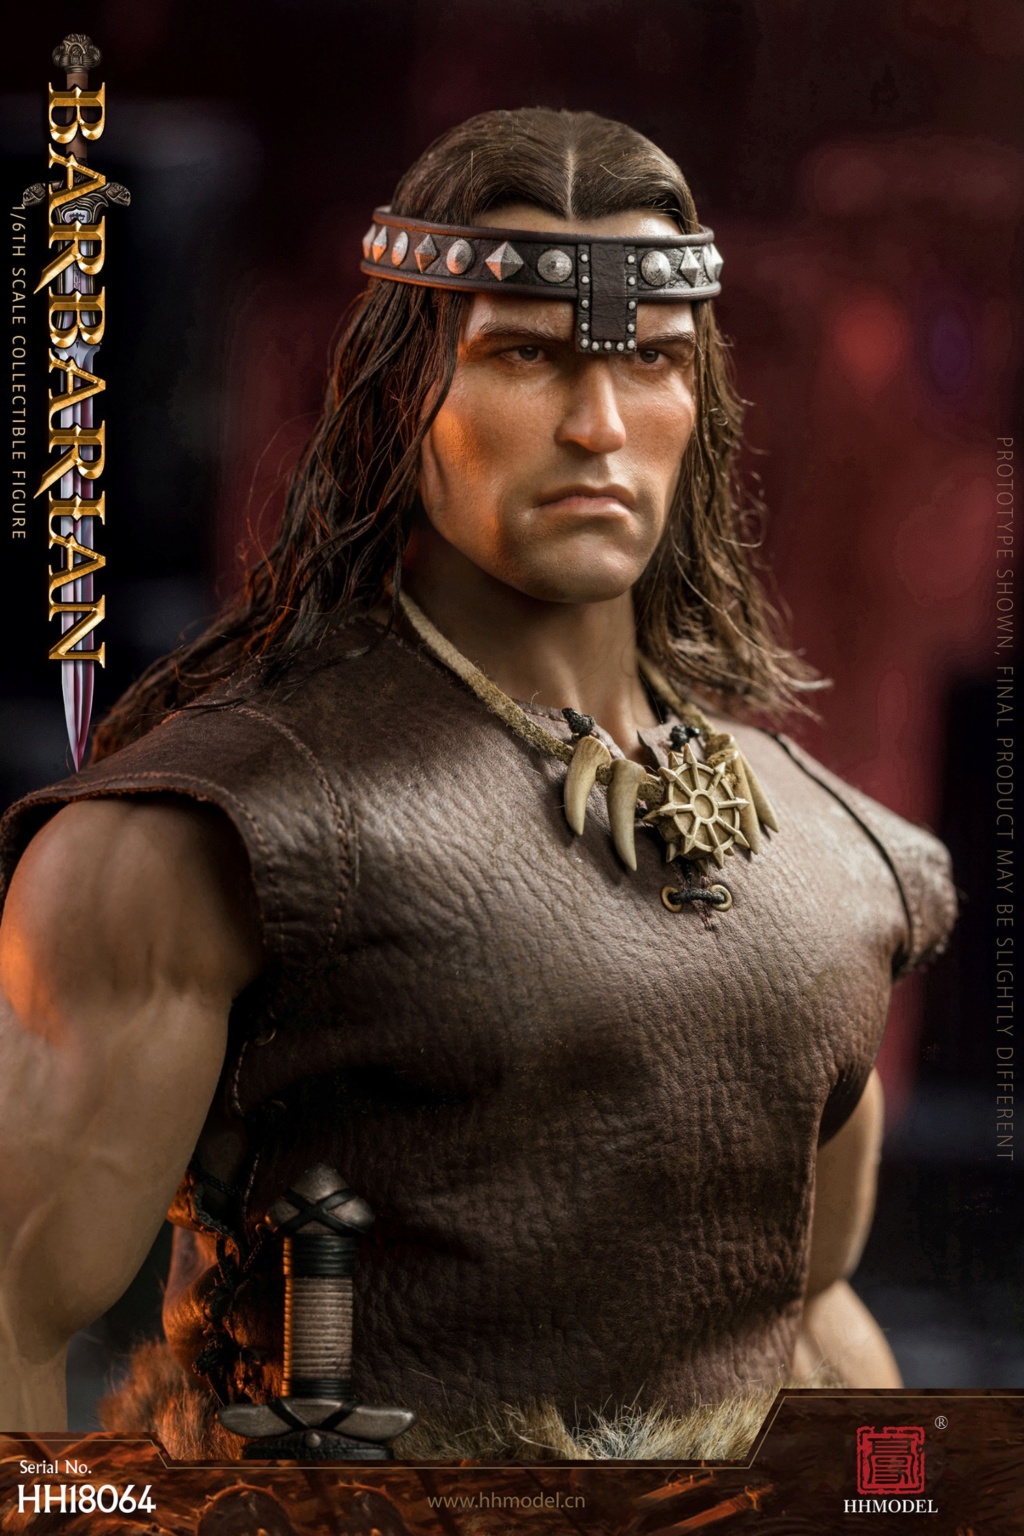 newproduct - NEW PRODUCT: Haoyutoys: HH18064 1/6 Scale The Barbarian 18001110